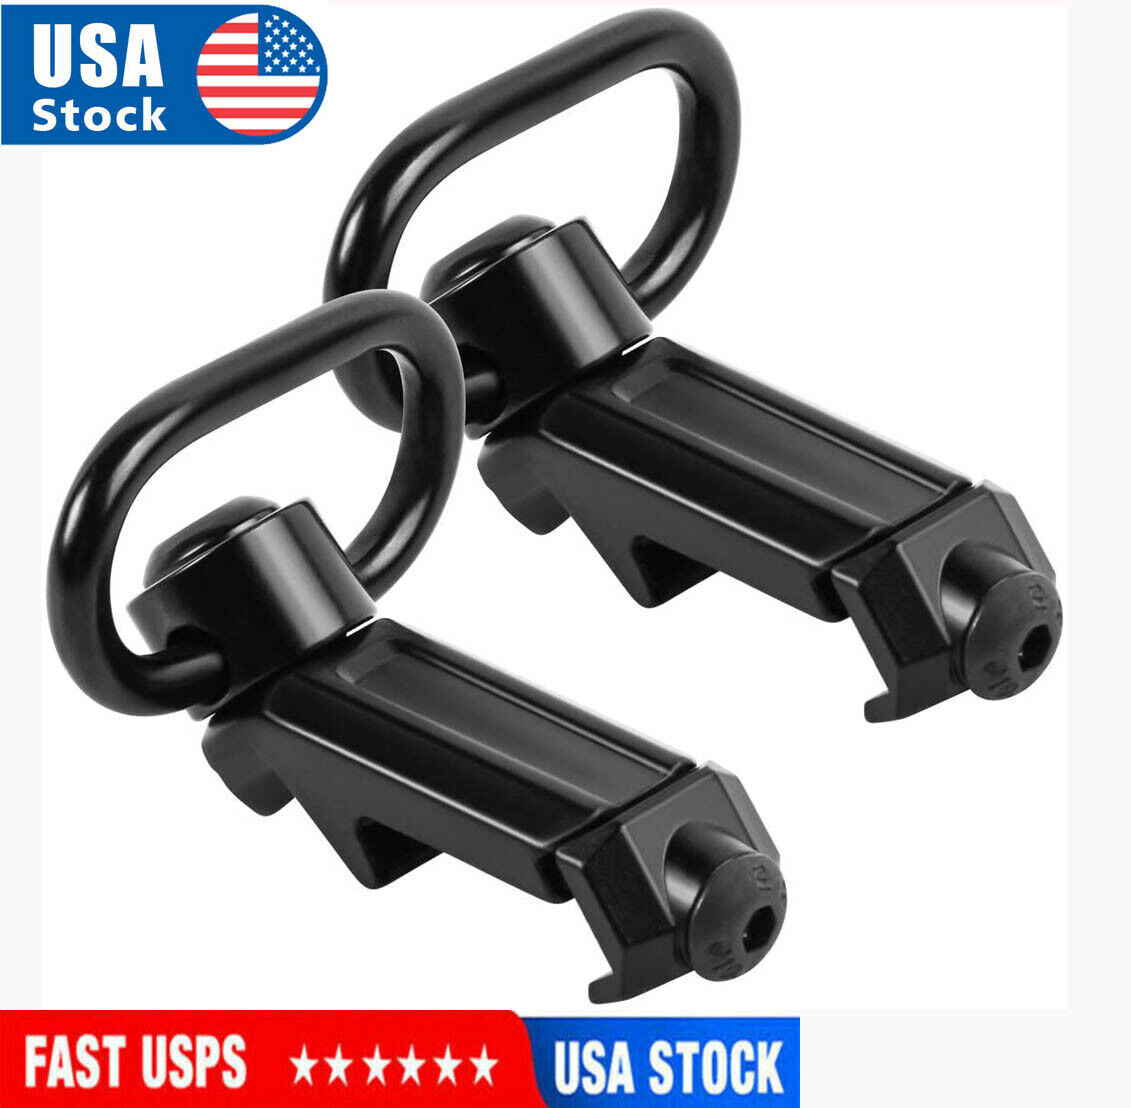 Tactical QD Sling Swivel Attachments 45 Degree Low Profile Picatinny Rail Mount Unbranded Does Not Apply